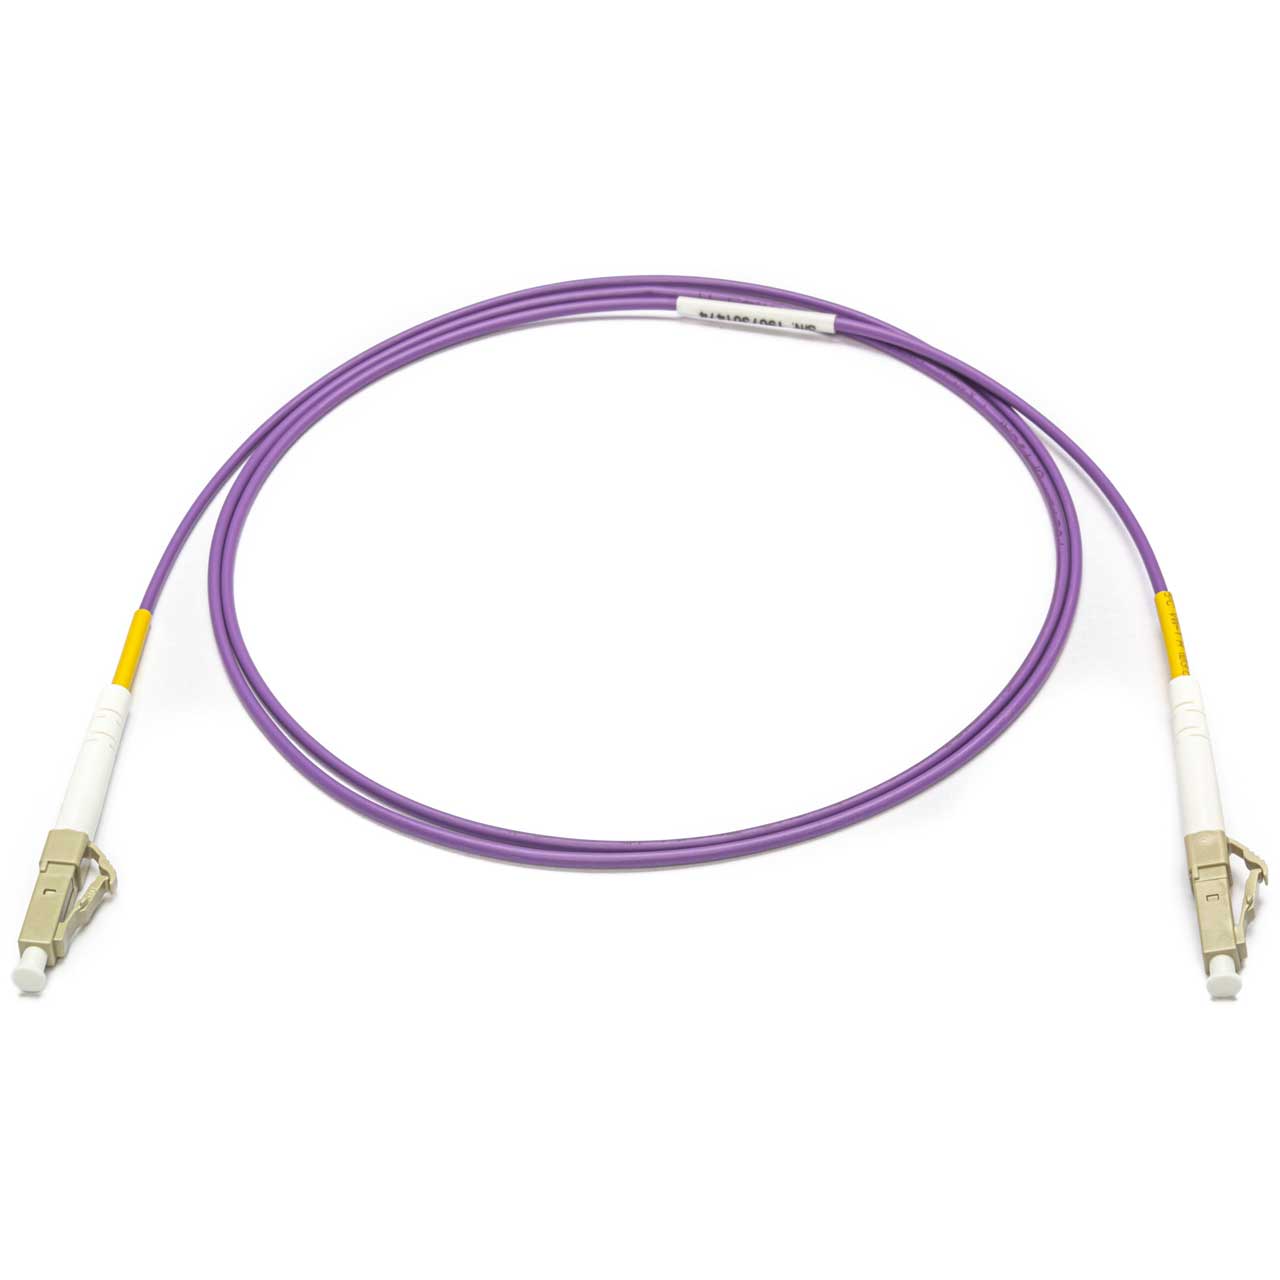 Camplex MMXSM4-LC-LC-001 OM4 50/125 10/40/100G Multimode Simplex LC to LC Armored Fiber Patch Cable - Purple - 1 Meter